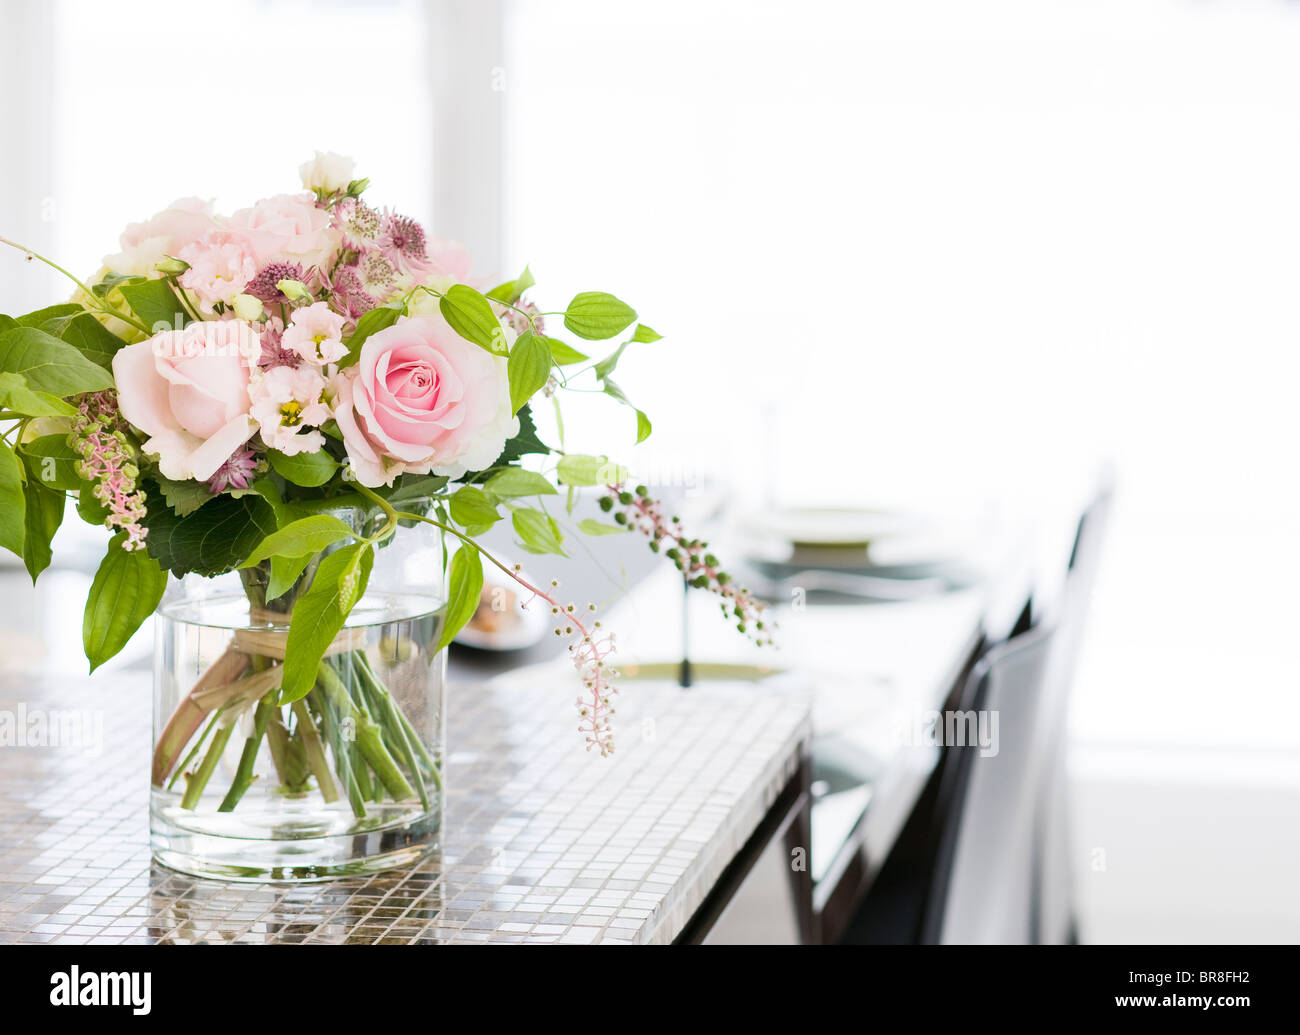 A Bunch of Flowers in a Vase at Dining Table Stock Photo